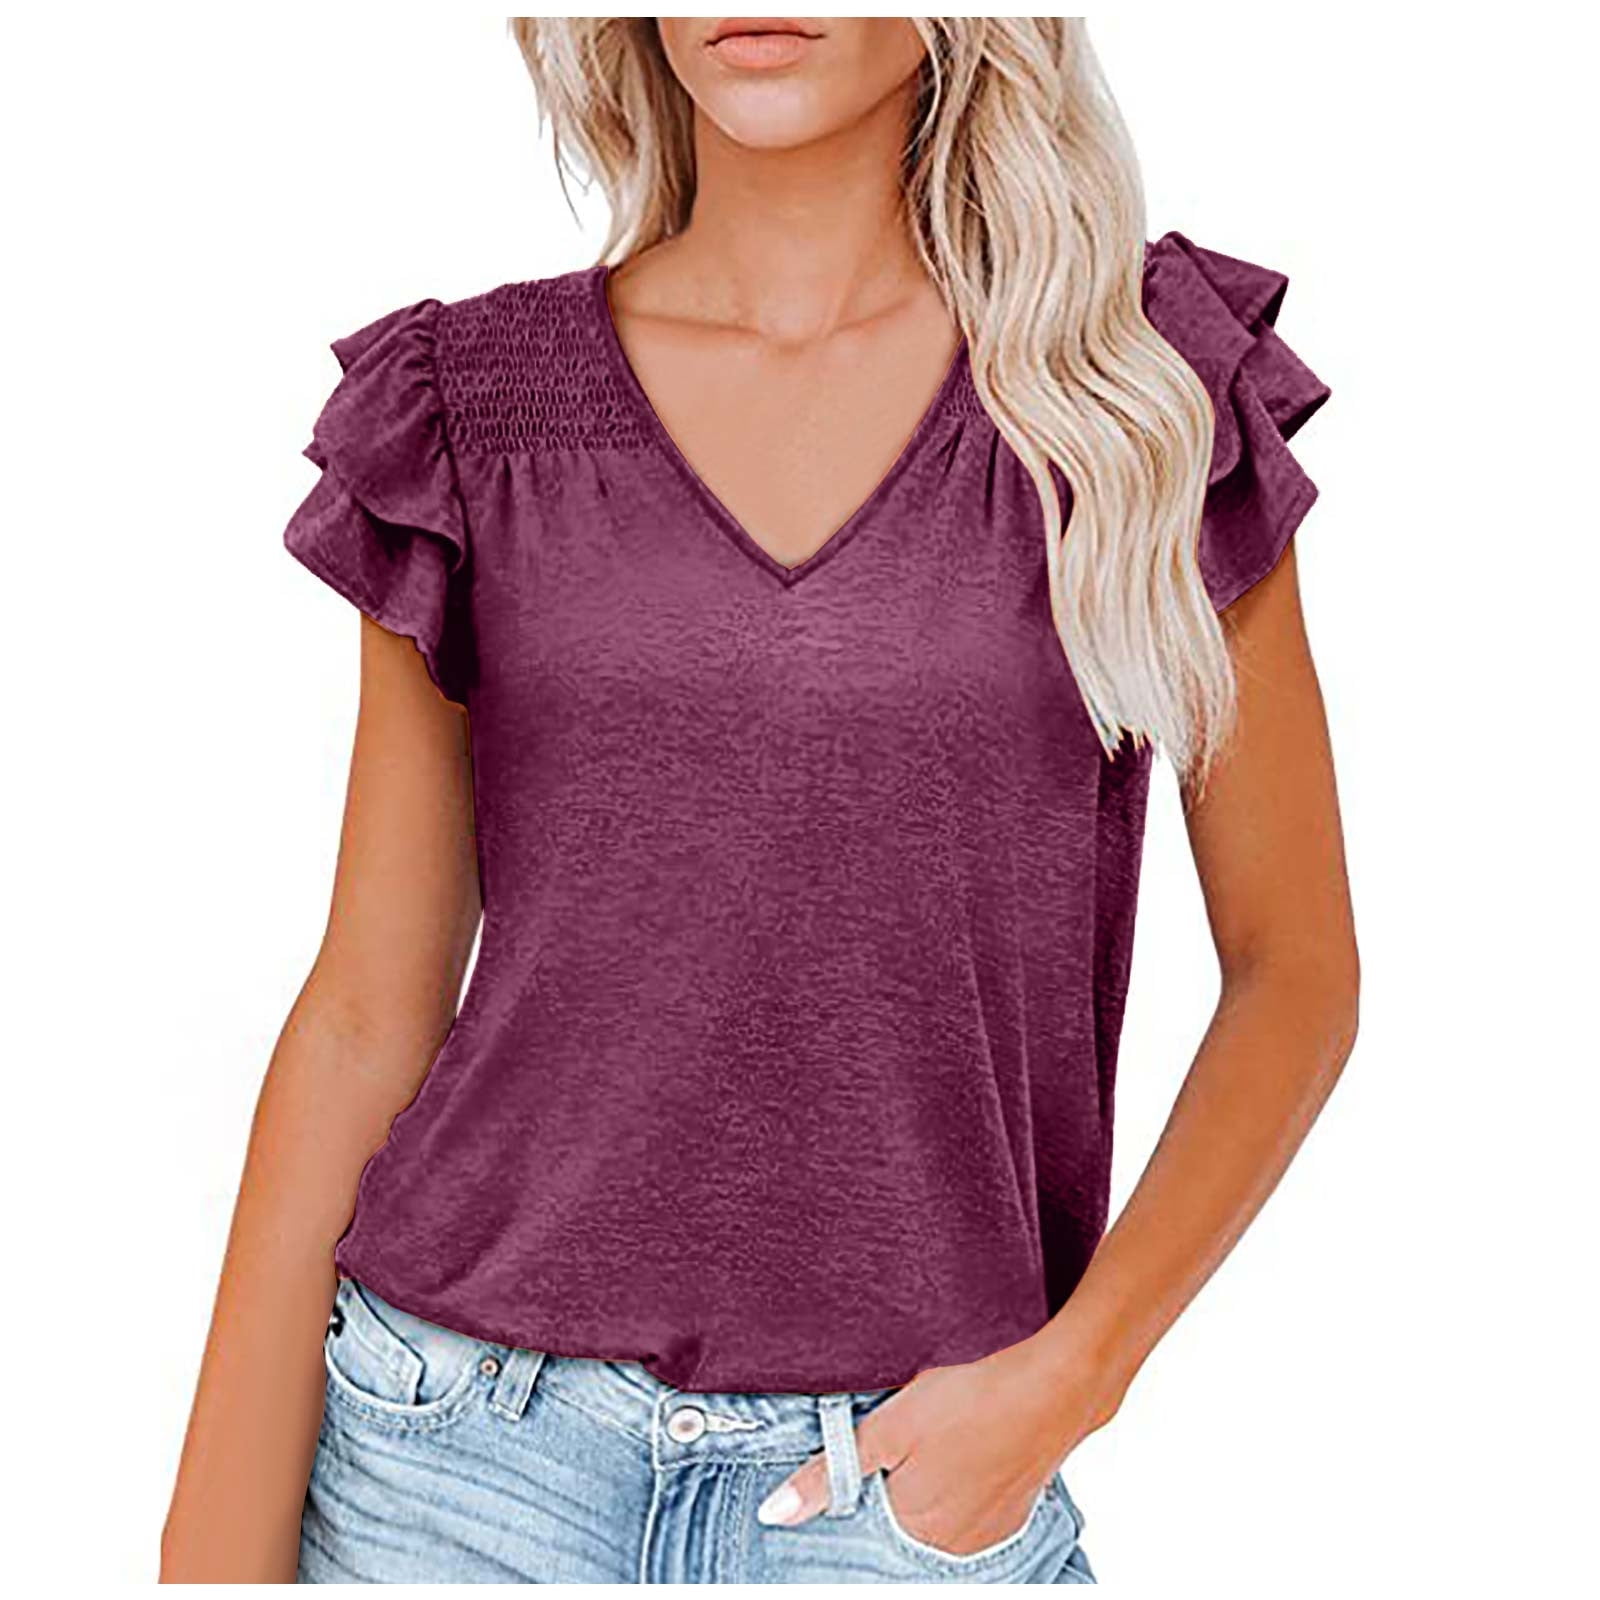 XFLWAM Womens Short Sleeve Casual T-Shirts V Neck Tops Tee Loose